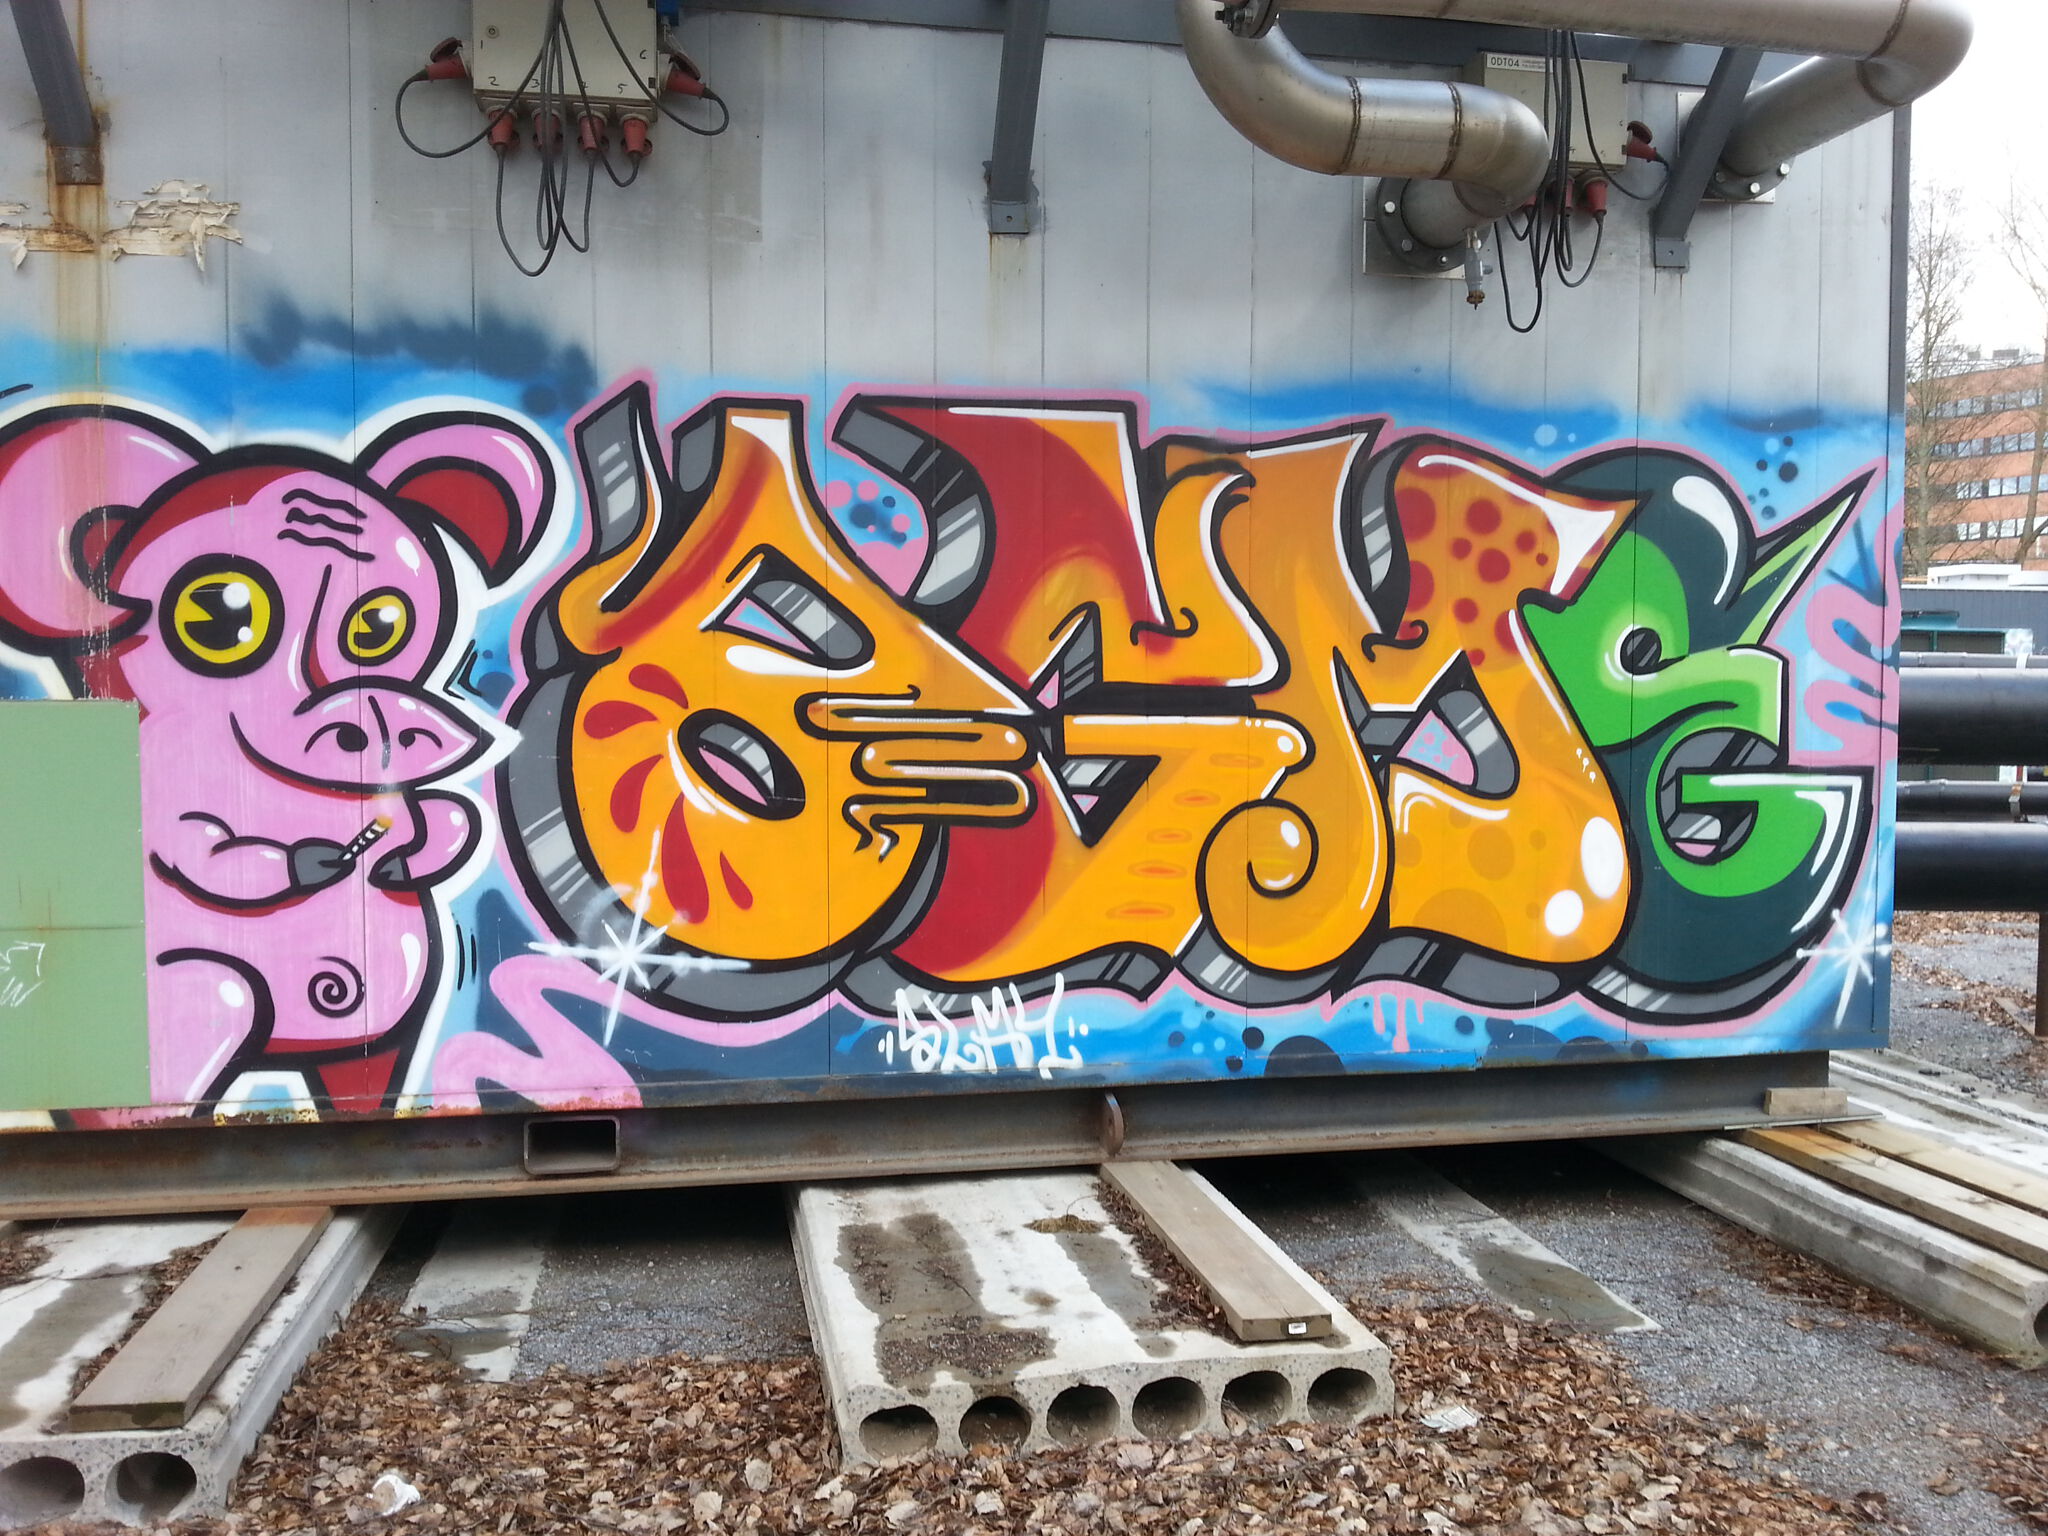 Agme, Tare, Shit&mdash;Streetart in a container